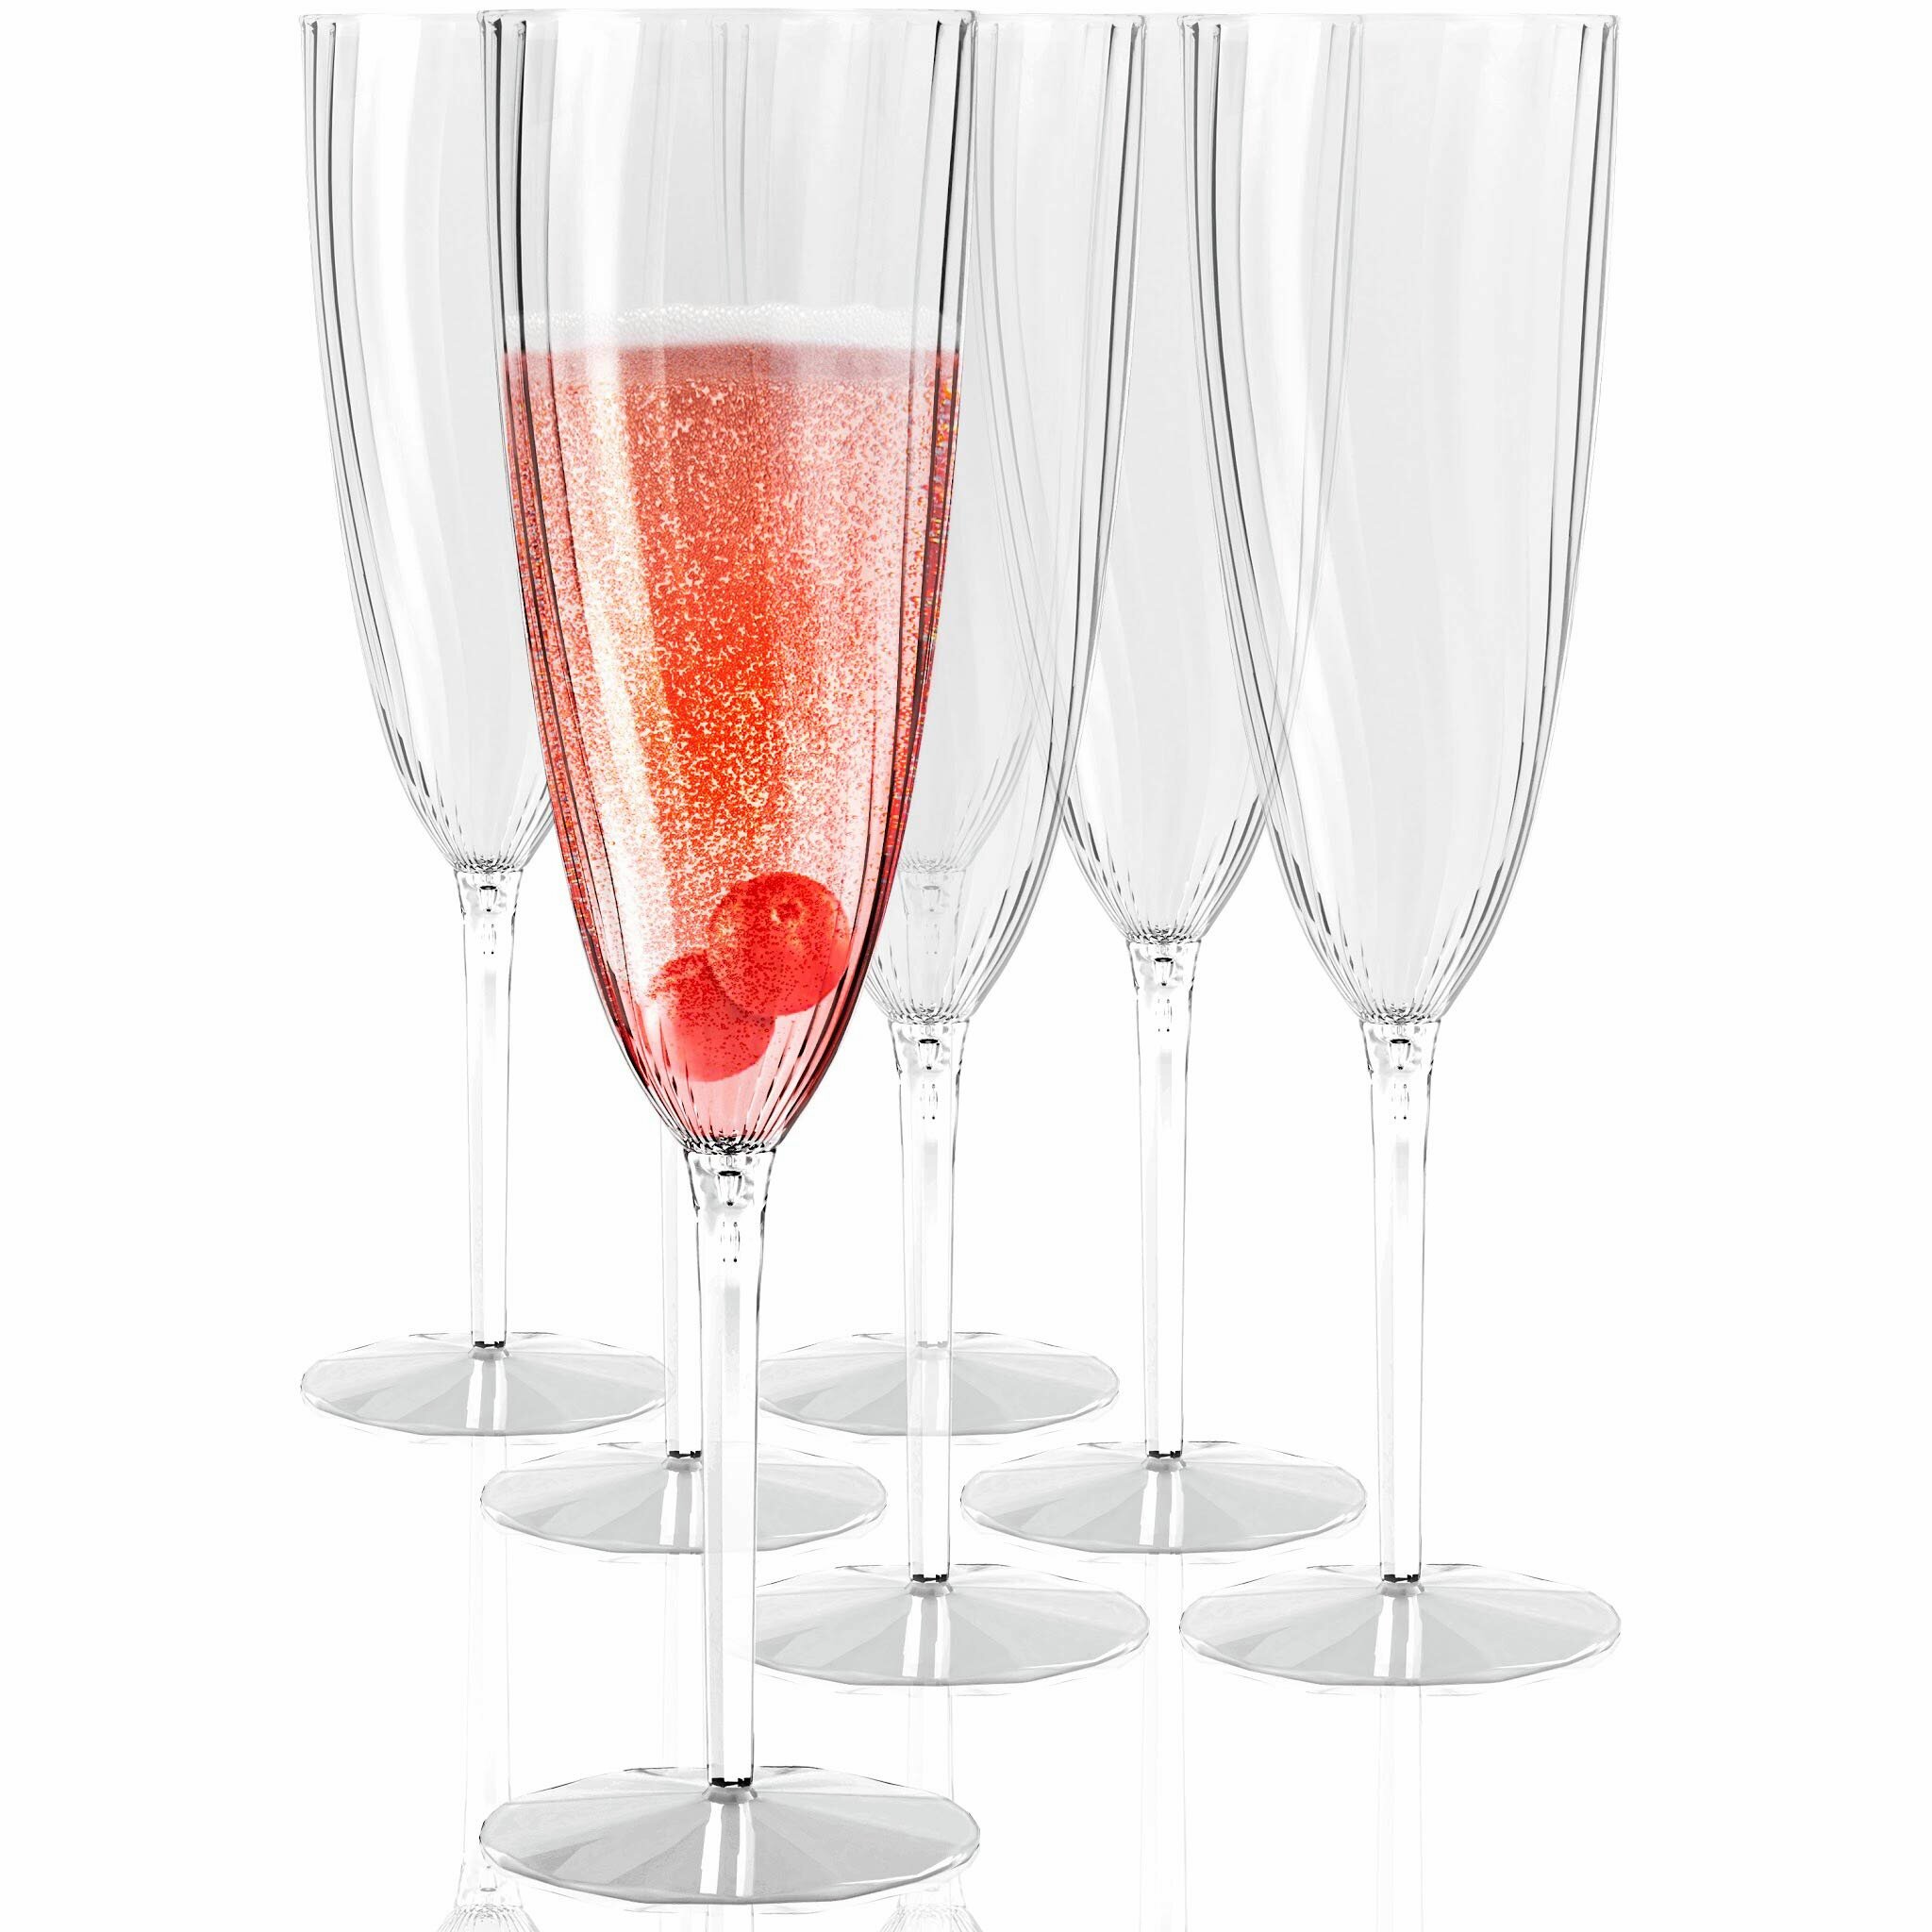 6 oz Plastic Champagne Glasses Disposable BPA Free Plastic Cups Set One Piece Champagne Flutes Plastic Wine Glasses Set of 12 for Wedding Mimosa Glasses Plastic Champagne Flutes Disposable 